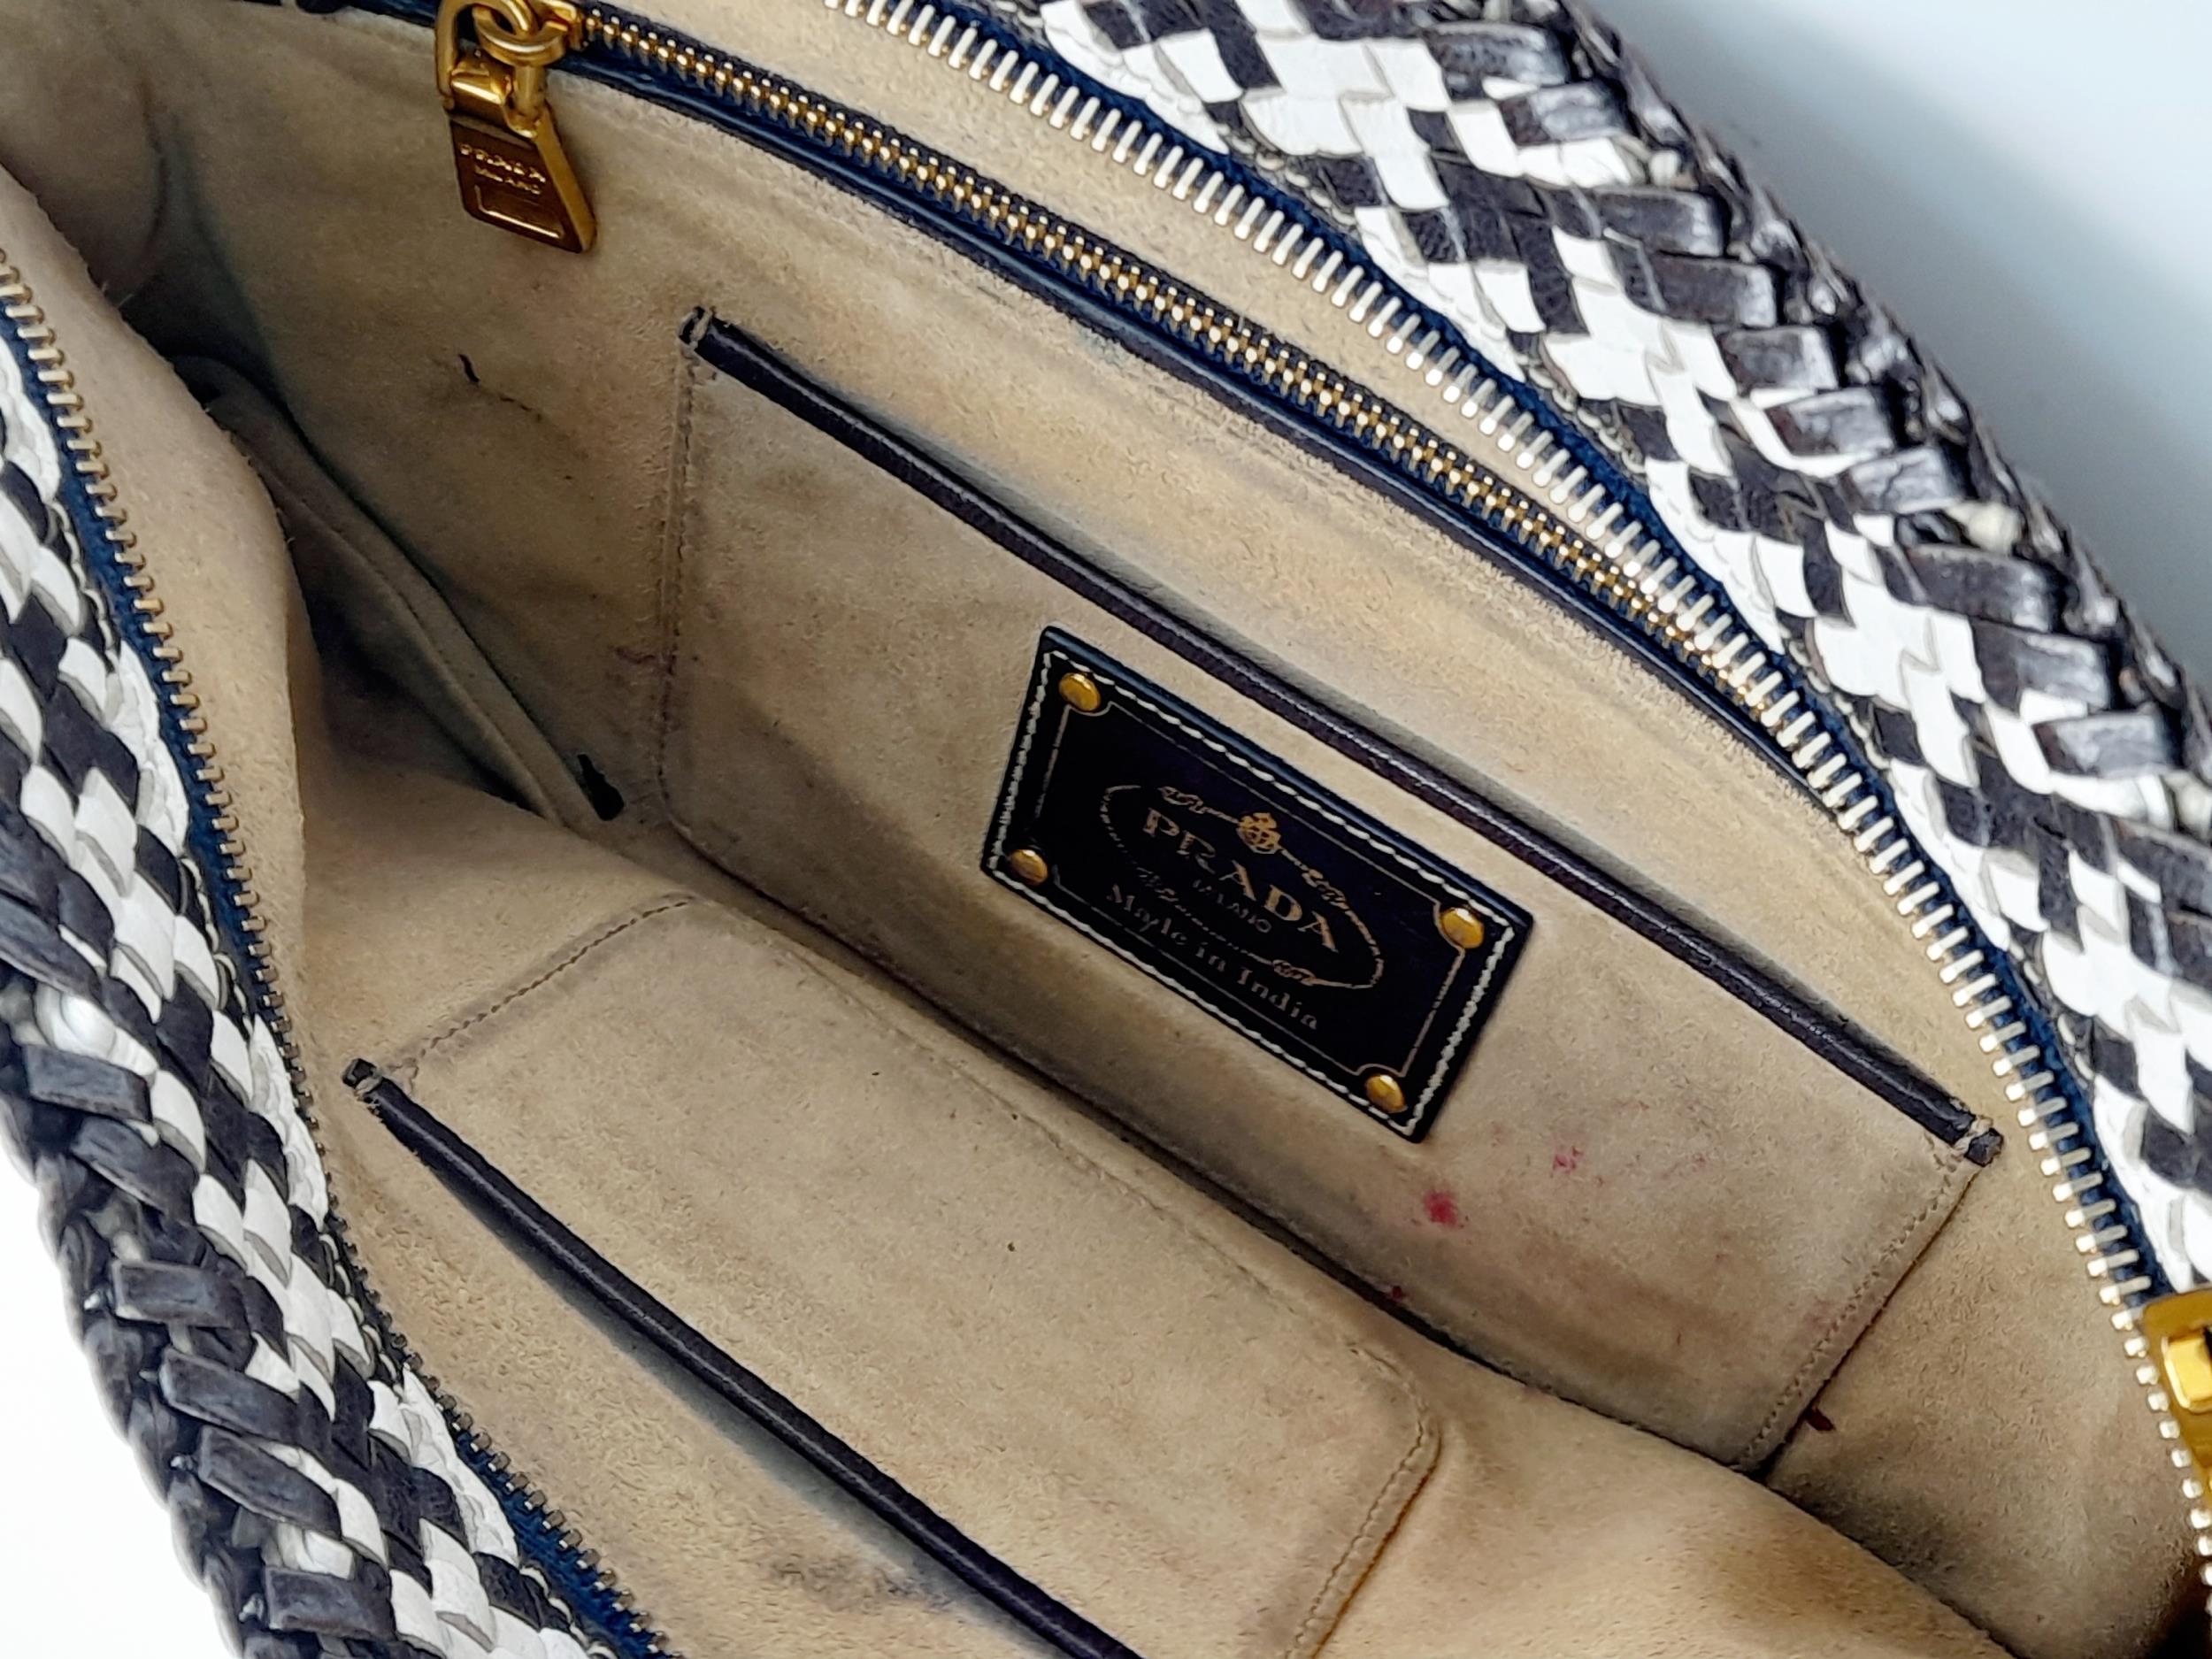 A Prada Black and White 'Madras' Clutch Bag. Woven leather exterior with gold-toned hardware and - Image 8 of 9